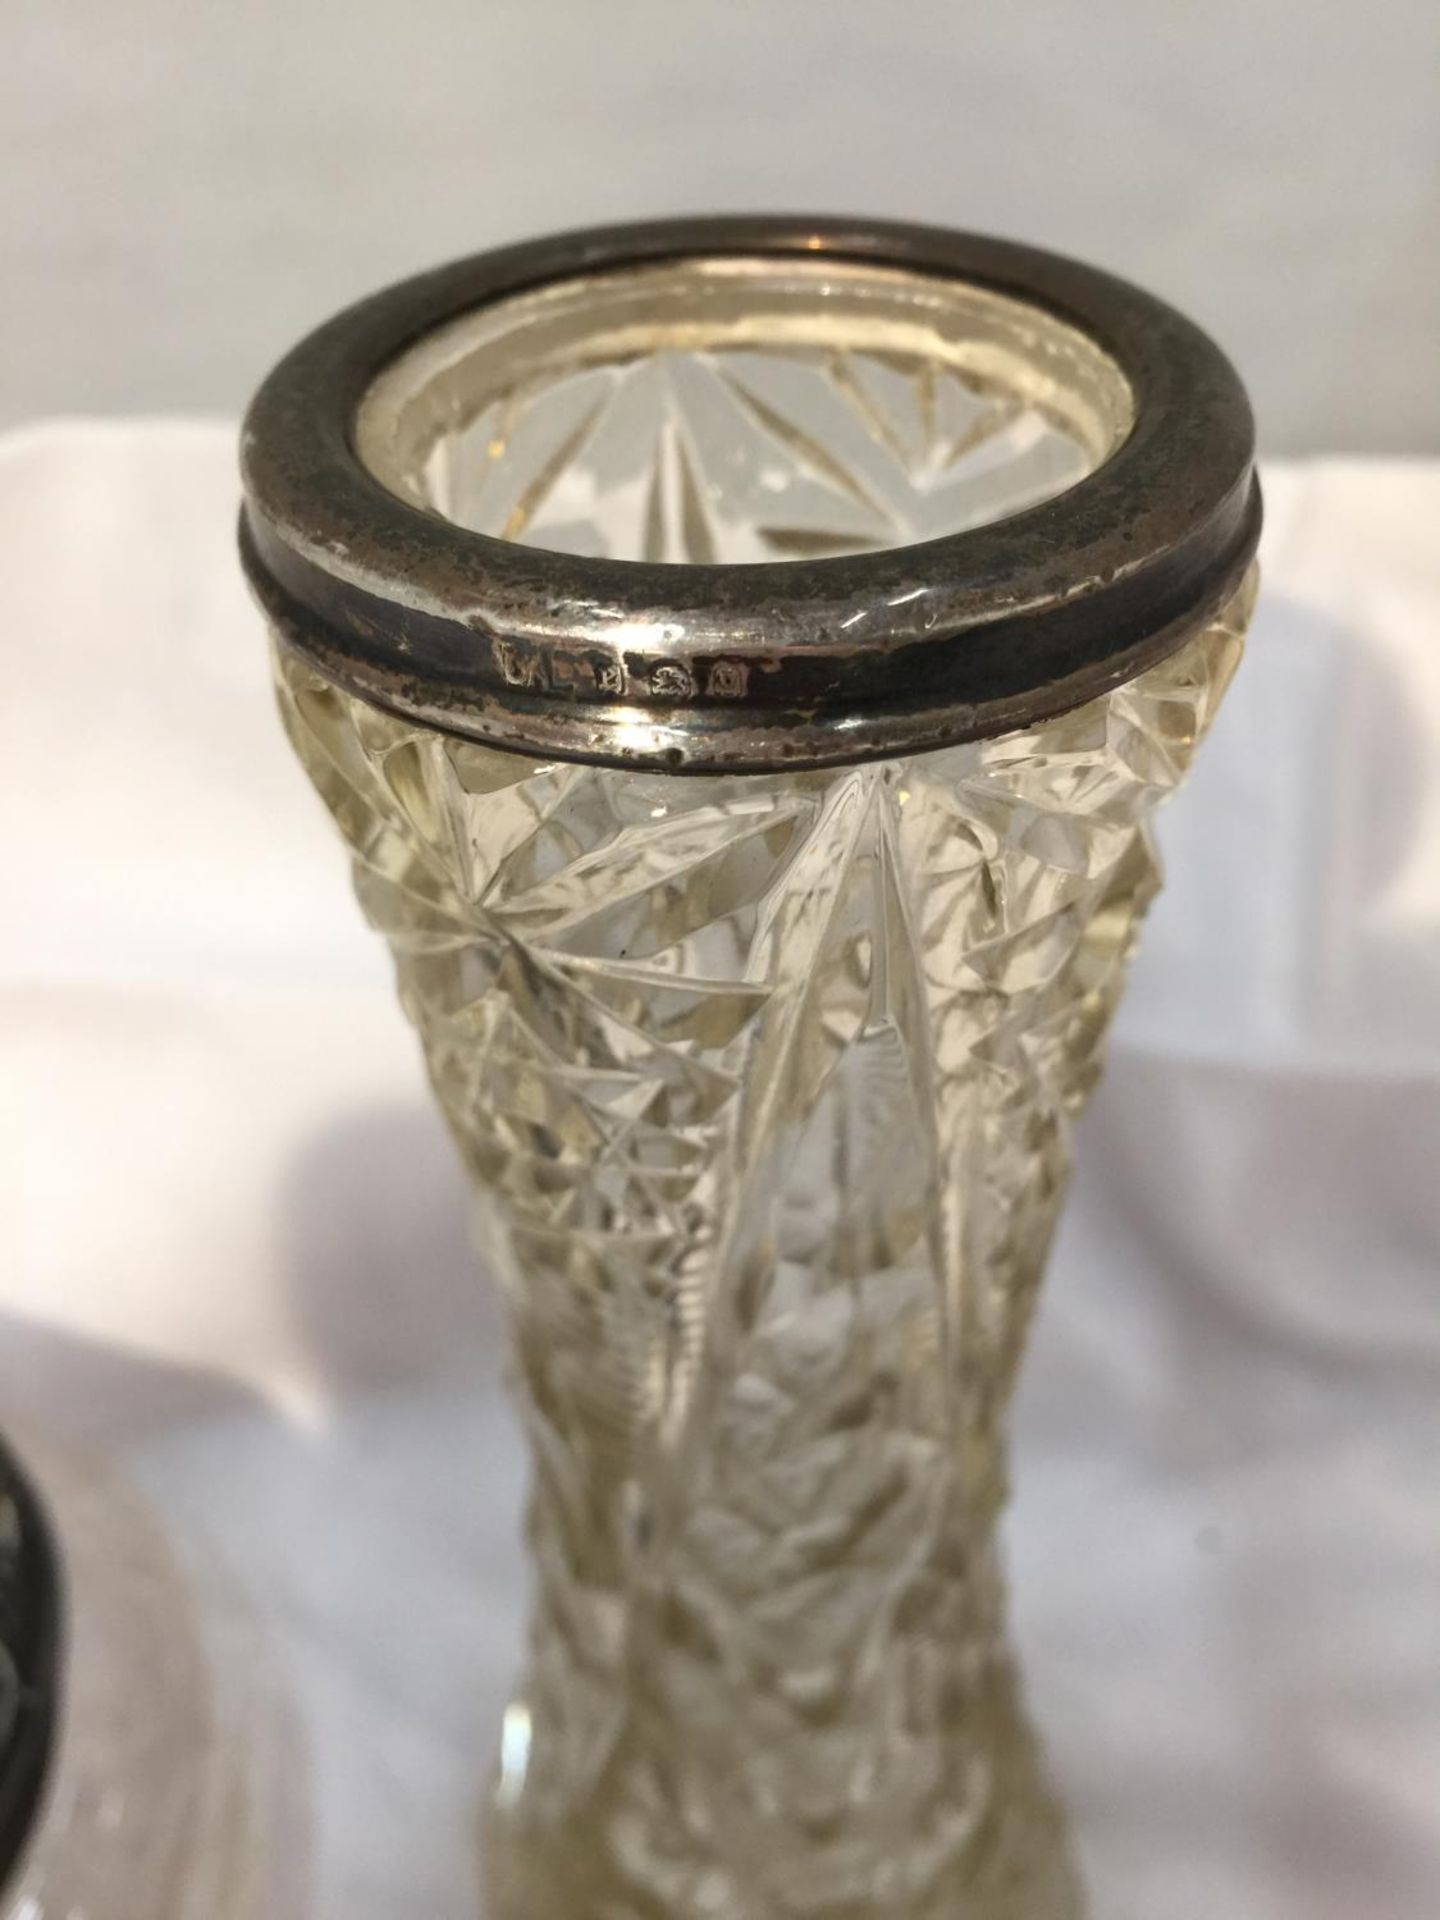 TWO CUT GLASS ITEMS ONE A JAR WITH AN ORNATE HALLMARKED BIRMINGHAM SILVER TOP AND A VASE WITH A - Image 4 of 5